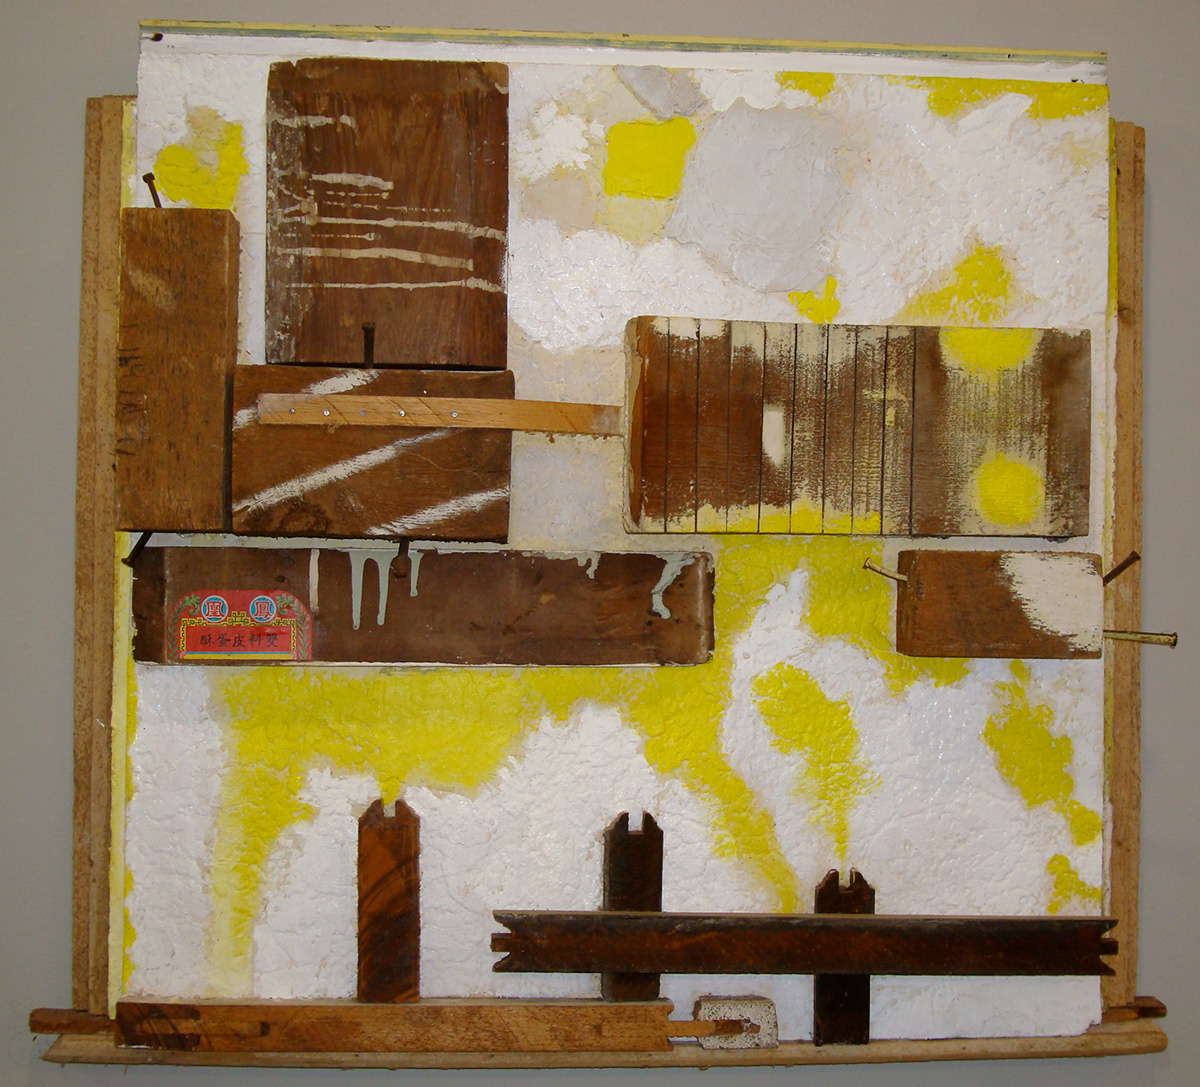 Assemblage Mixed Mediums constructs constructions combines wall sculpture 3D low relief